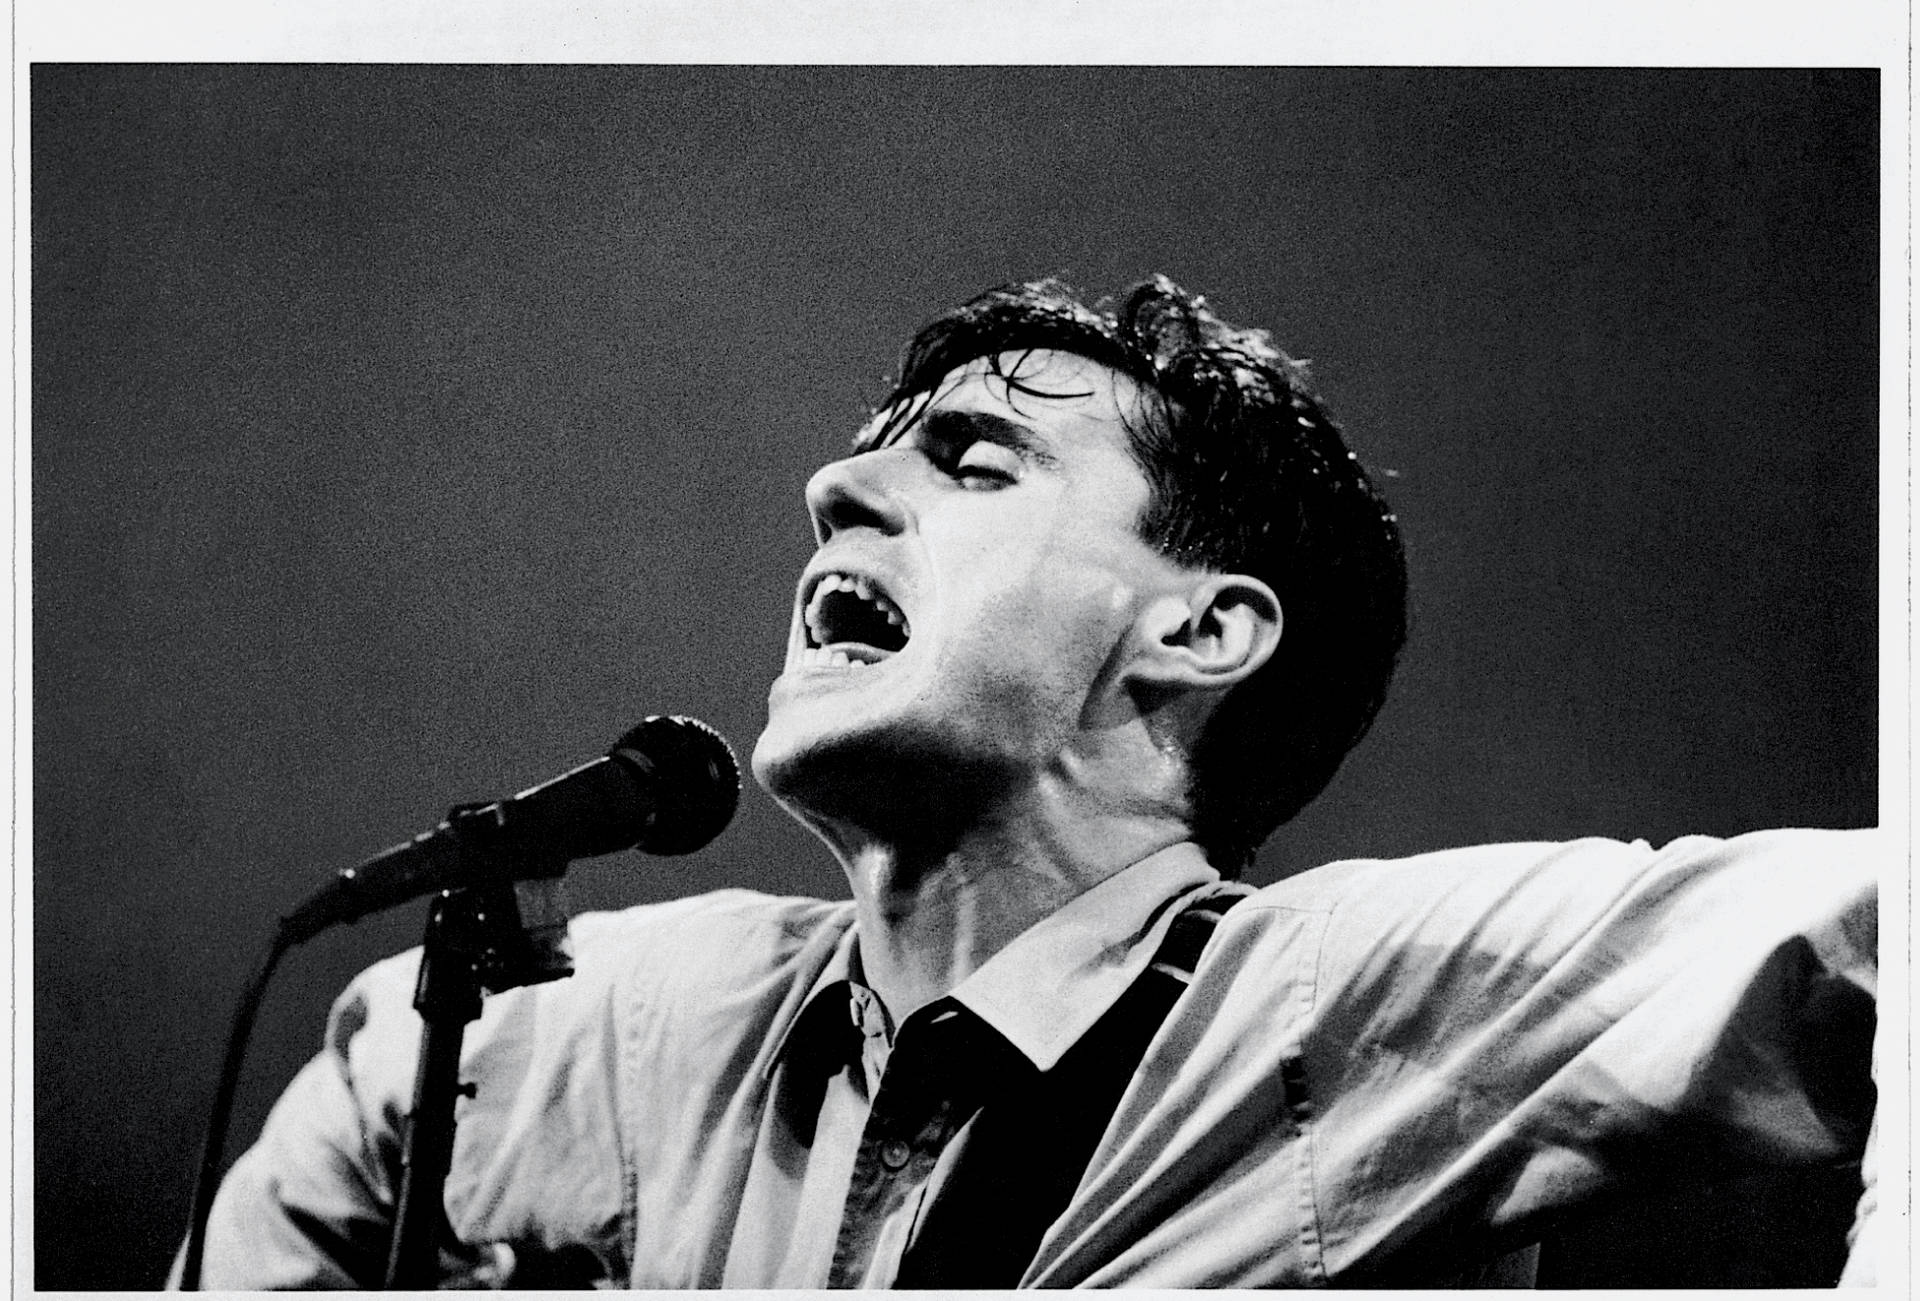 Iconic Black and White Image of David Byrne Wallpaper